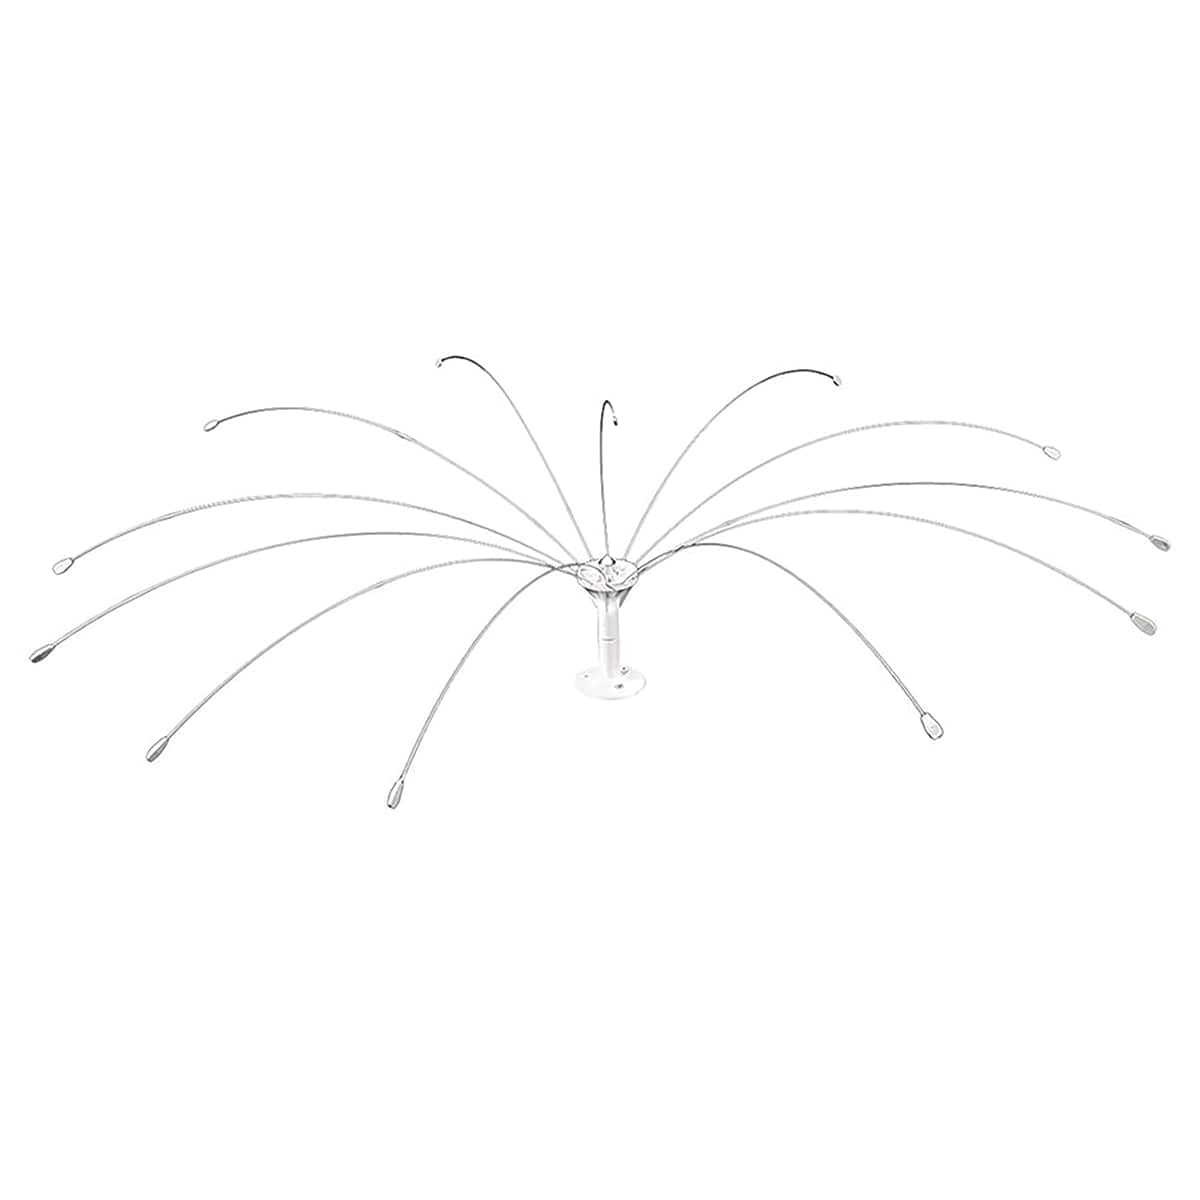 Bird Spider 360 - 6 Ft W/ Pvc Base And Screws - Spinnable